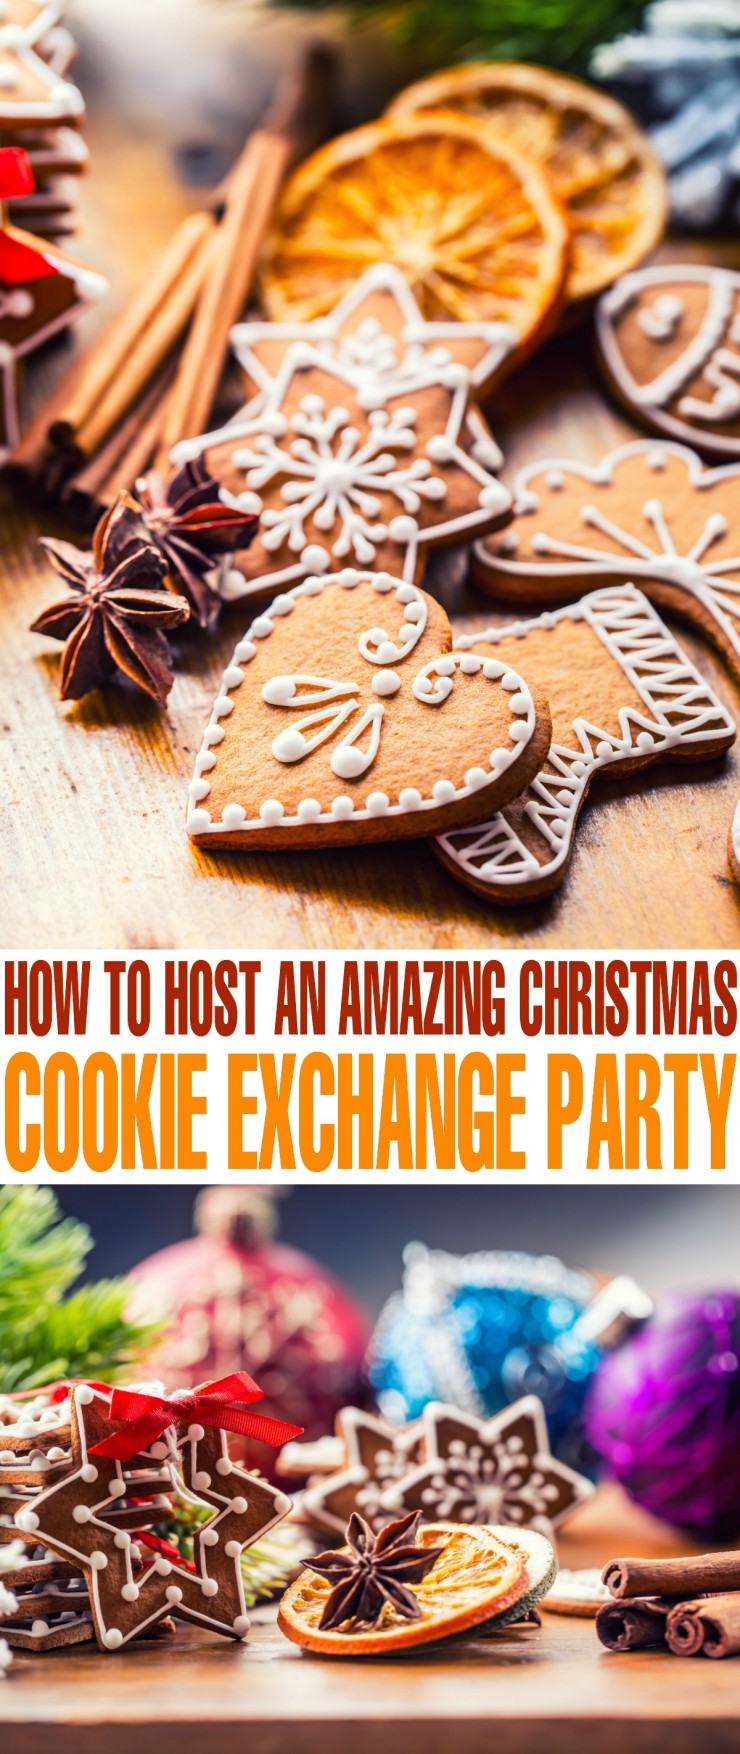 Do you want to throw a cookie exchange party this Christmas? Throwing a Christmas cookie exchange party gives friends and family the opportunity to get together and have fun.